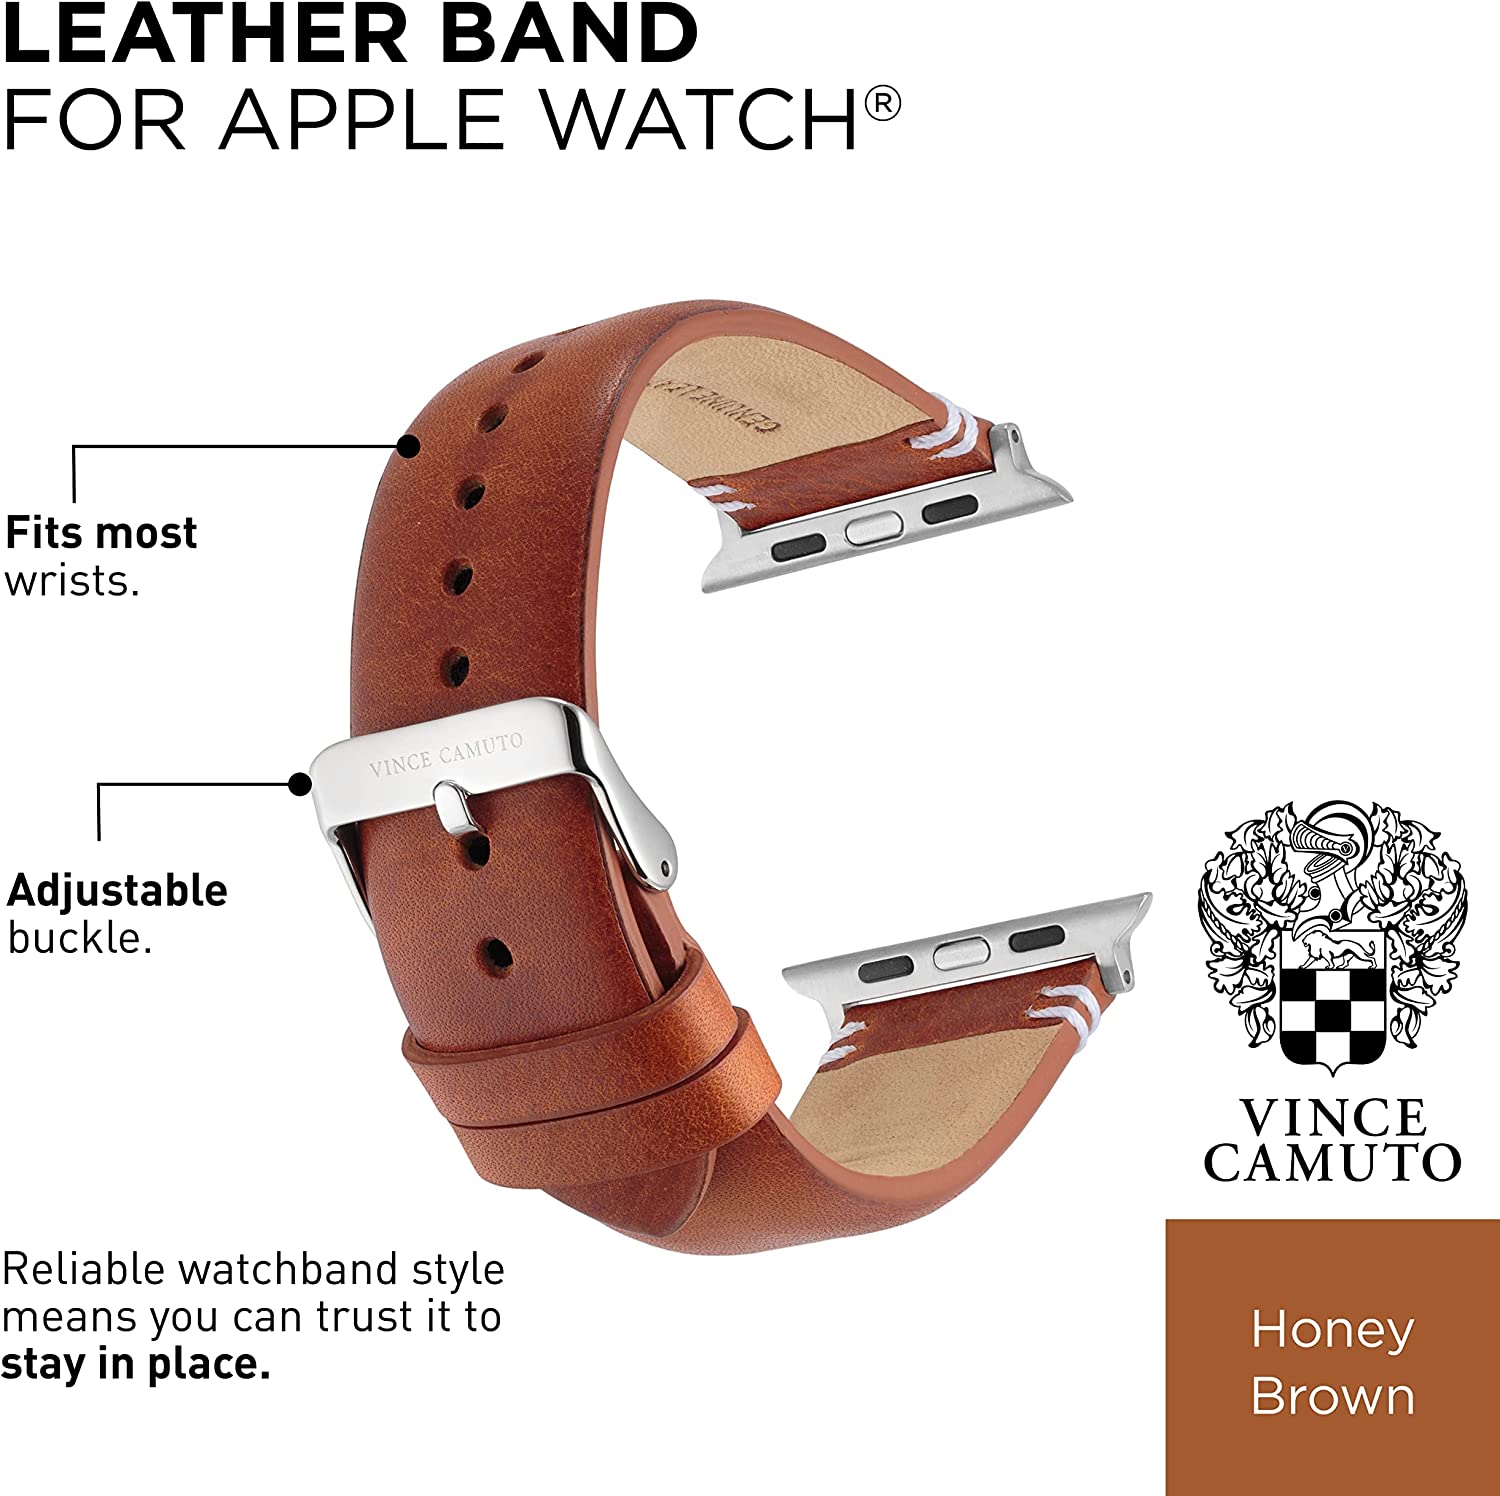 Vince Camuto Fashion Band for Apple Watch, Secure, Adjustable, Fits Most Wrists＿並行輸入